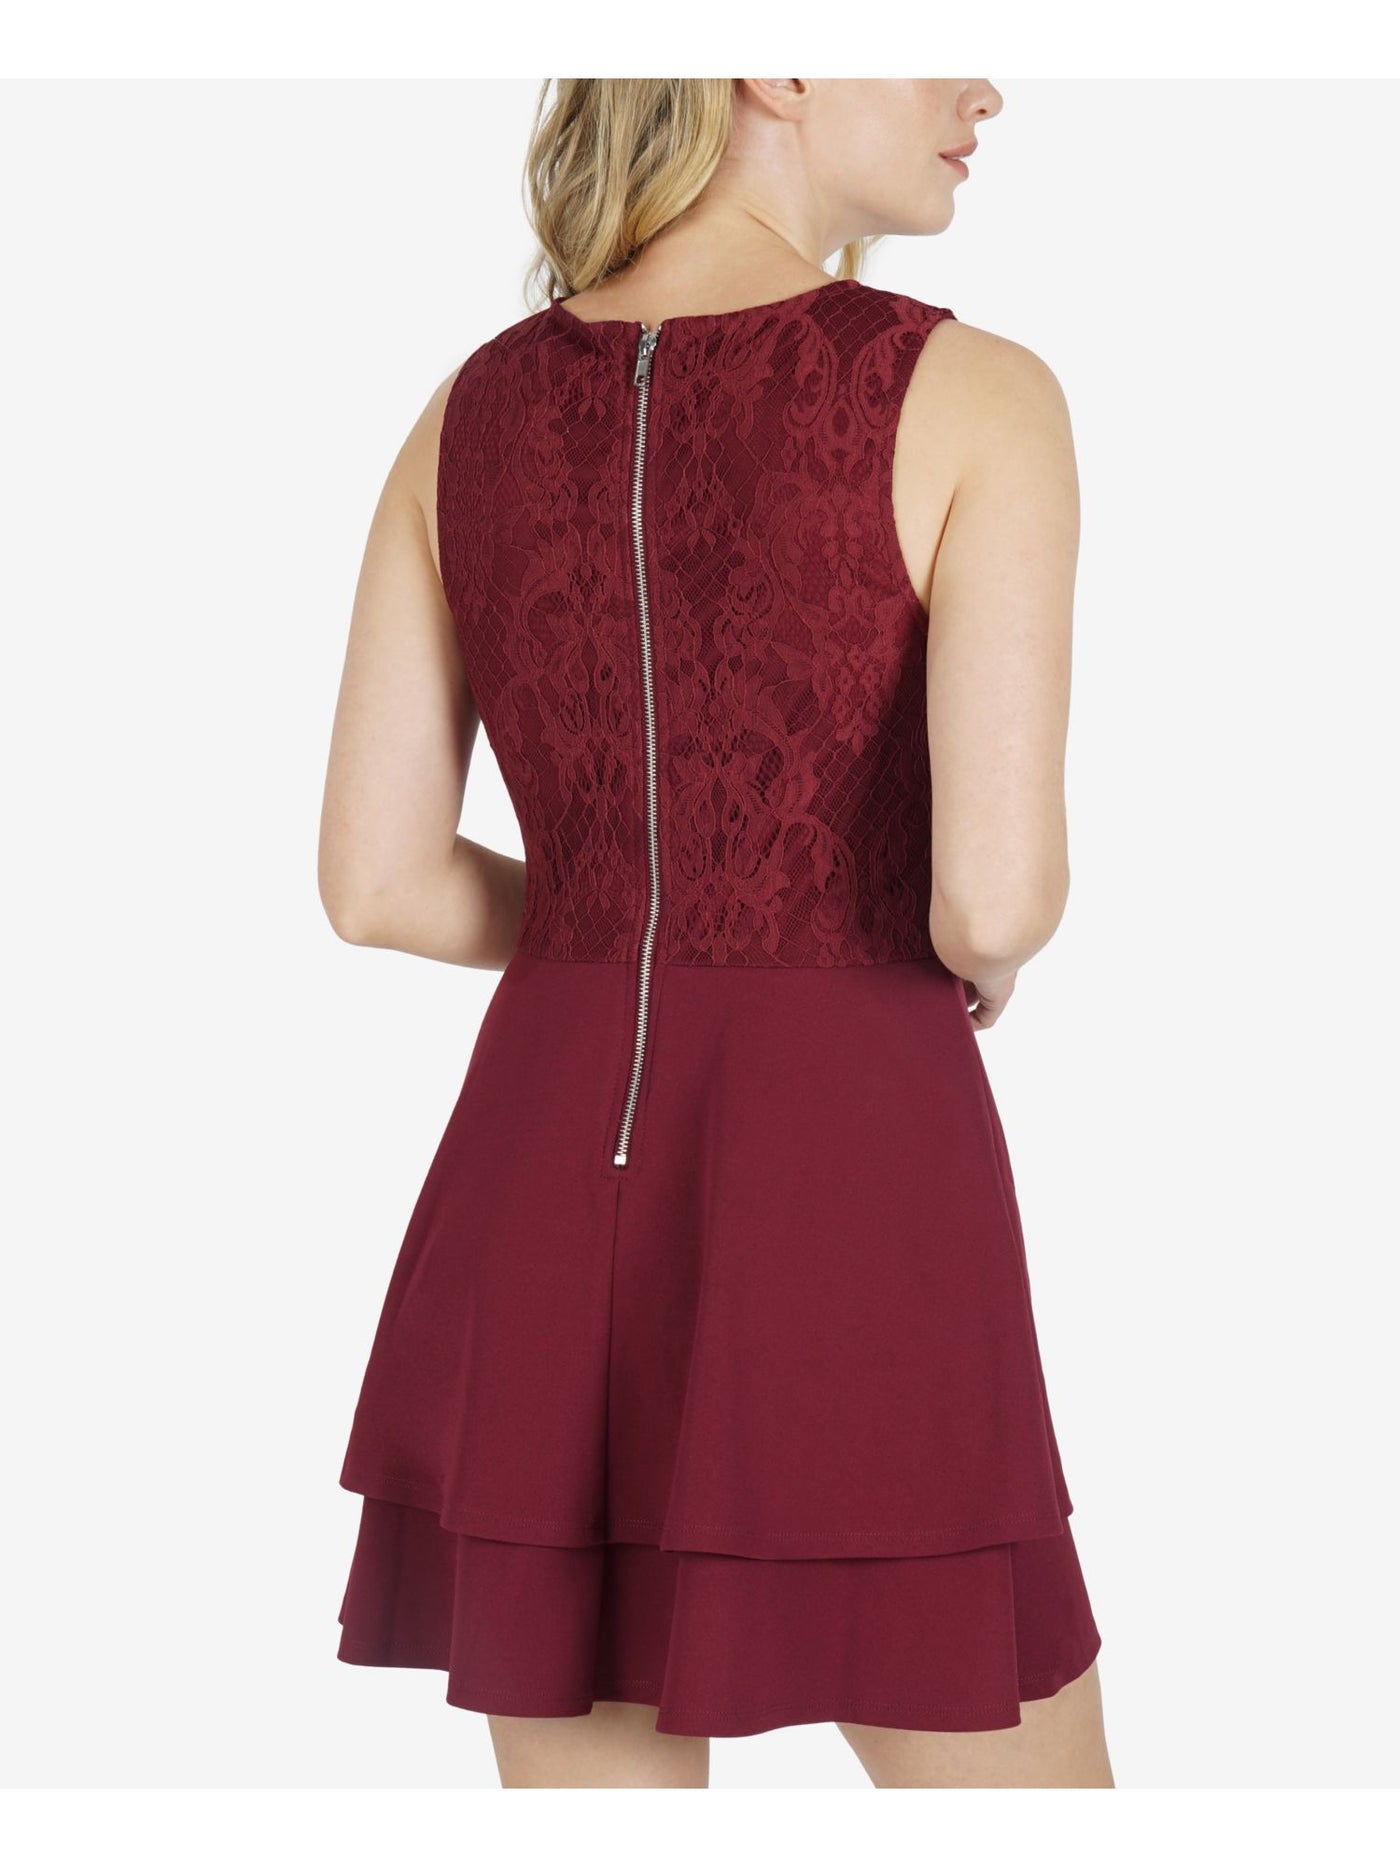 SPEECHLESS Womens Burgundy Stretch Pocketed Zippered Lace Top Tiered Flounce Hem Sleeveless Jewel Neck Short Party Fit + Flare Dress Juniors S